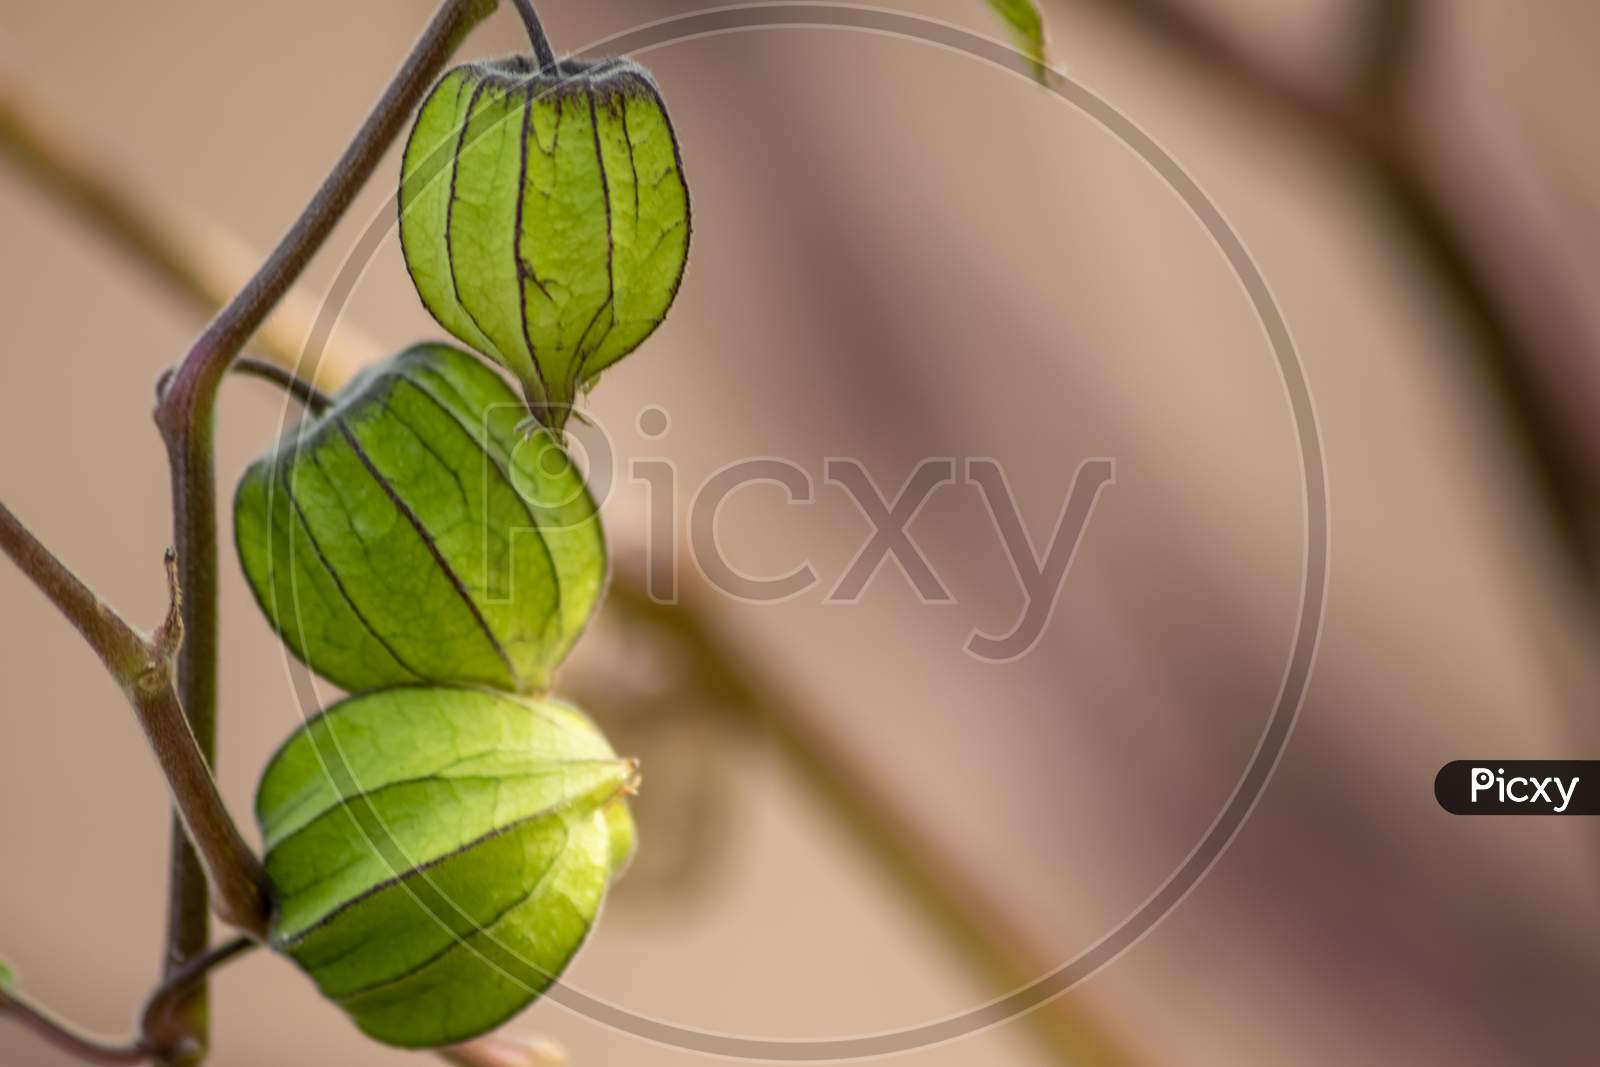 Beautiful green physalis ripening as home grown healthy fruit with filigree veins of the green physalis shell shows translucent organic fruit cage as macro closeup